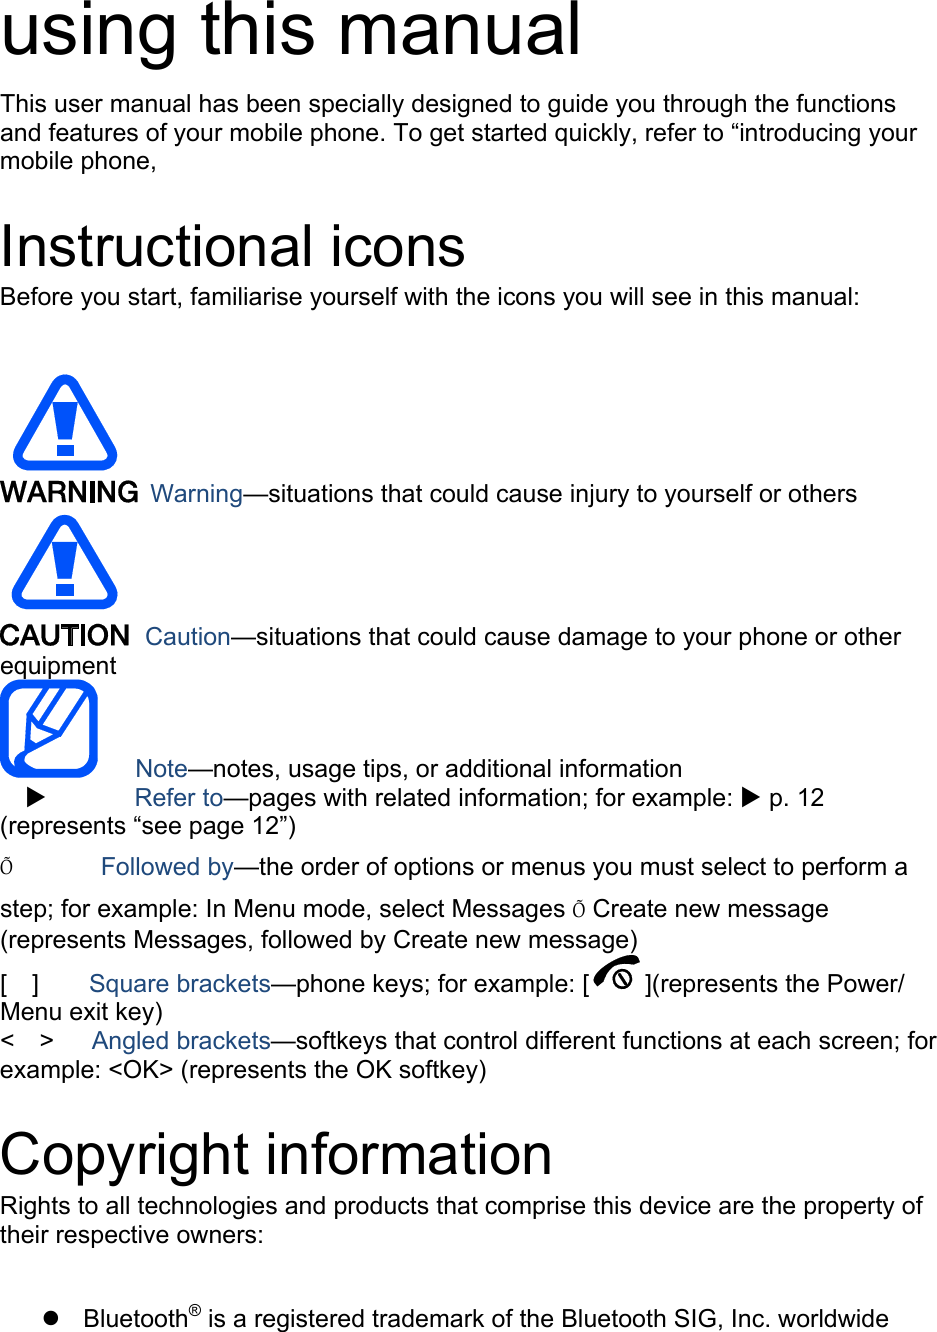   using this manual This user manual has been specially designed to guide you through the functions and features of your mobile phone. To get started quickly, refer to “introducing your mobile phone,  Instructional icons Before you start, familiarise yourself with the icons you will see in this manual:     Warning—situations that could cause injury to yourself or others  Caution—situations that could cause damage to your phone or other equipment    Note—notes, usage tips, or additional information   X       Refer to—pages with related information; for example: X p. 12 (represents “see page 12”) Õ       Followed by—the order of options or menus you must select to perform a step; for example: In Menu mode, select Messages Õ Create new message (represents Messages, followed by Create new message) [  ]    Square brackets—phone keys; for example: [ ](represents the Power/ Menu exit key) &lt;  &gt;   Angled brackets—softkeys that control different functions at each screen; for example: &lt;OK&gt; (represents the OK softkey)  Copyright information Rights to all technologies and products that comprise this device are the property of their respective owners:  z Bluetooth® is a registered trademark of the Bluetooth SIG, Inc. worldwide 